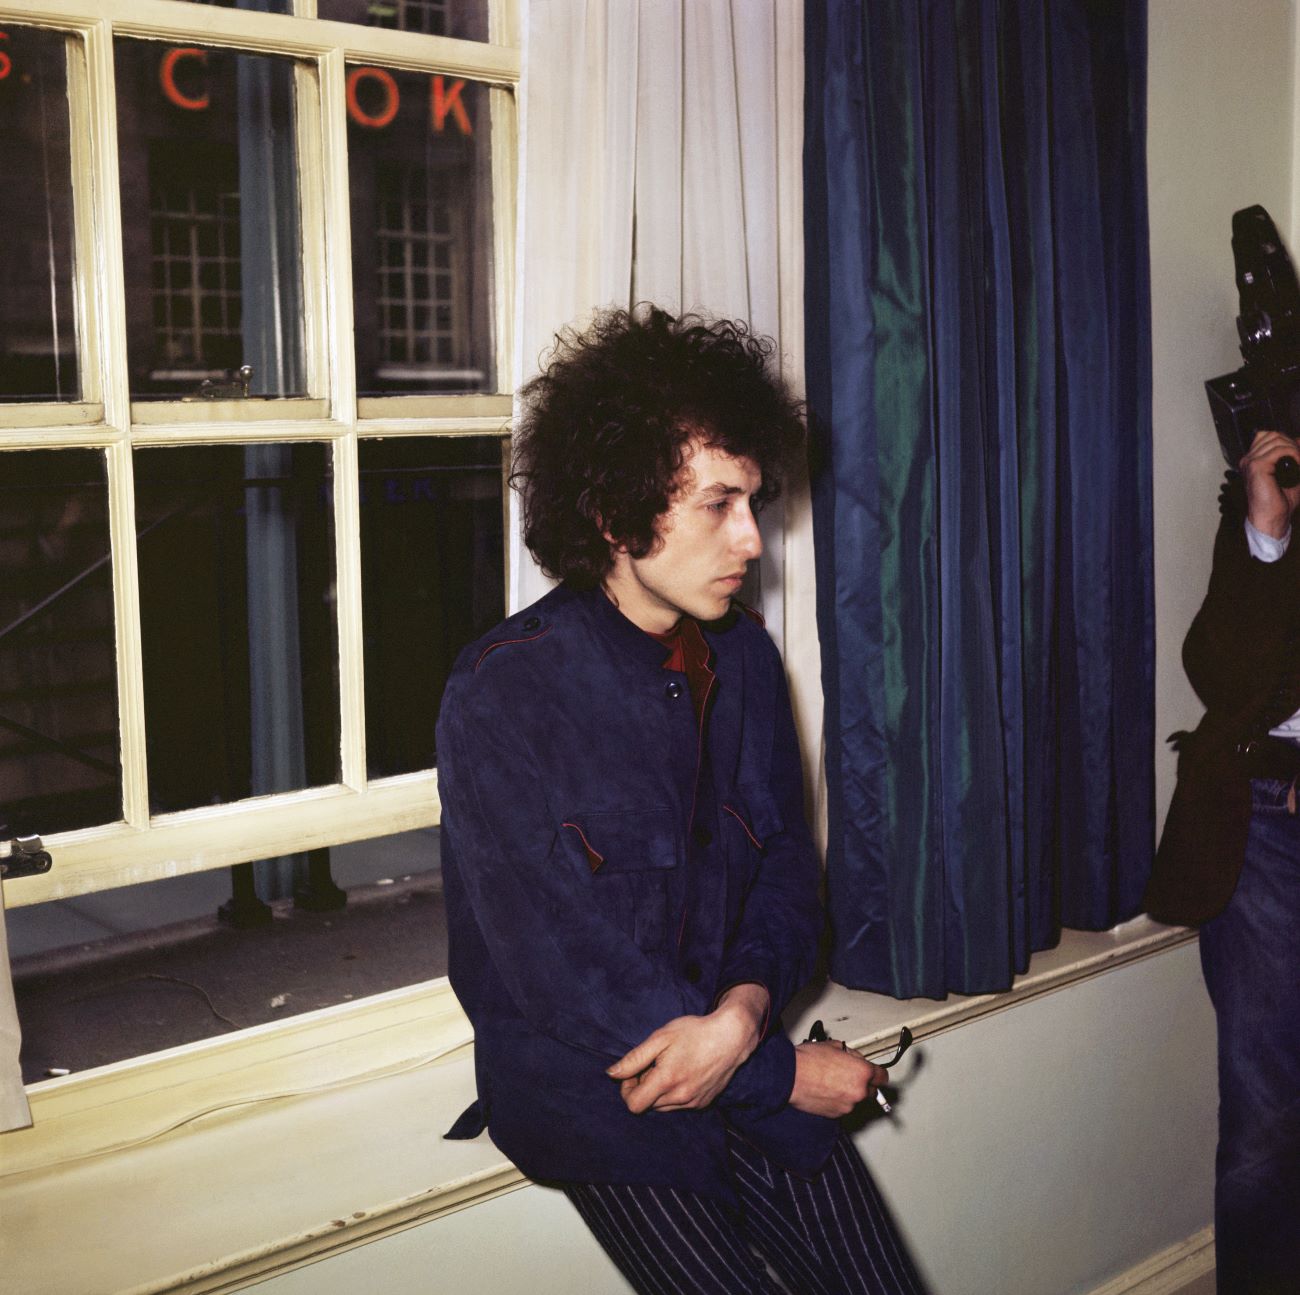 Bob Dylan holds a cigarette and leans on a window ledge.